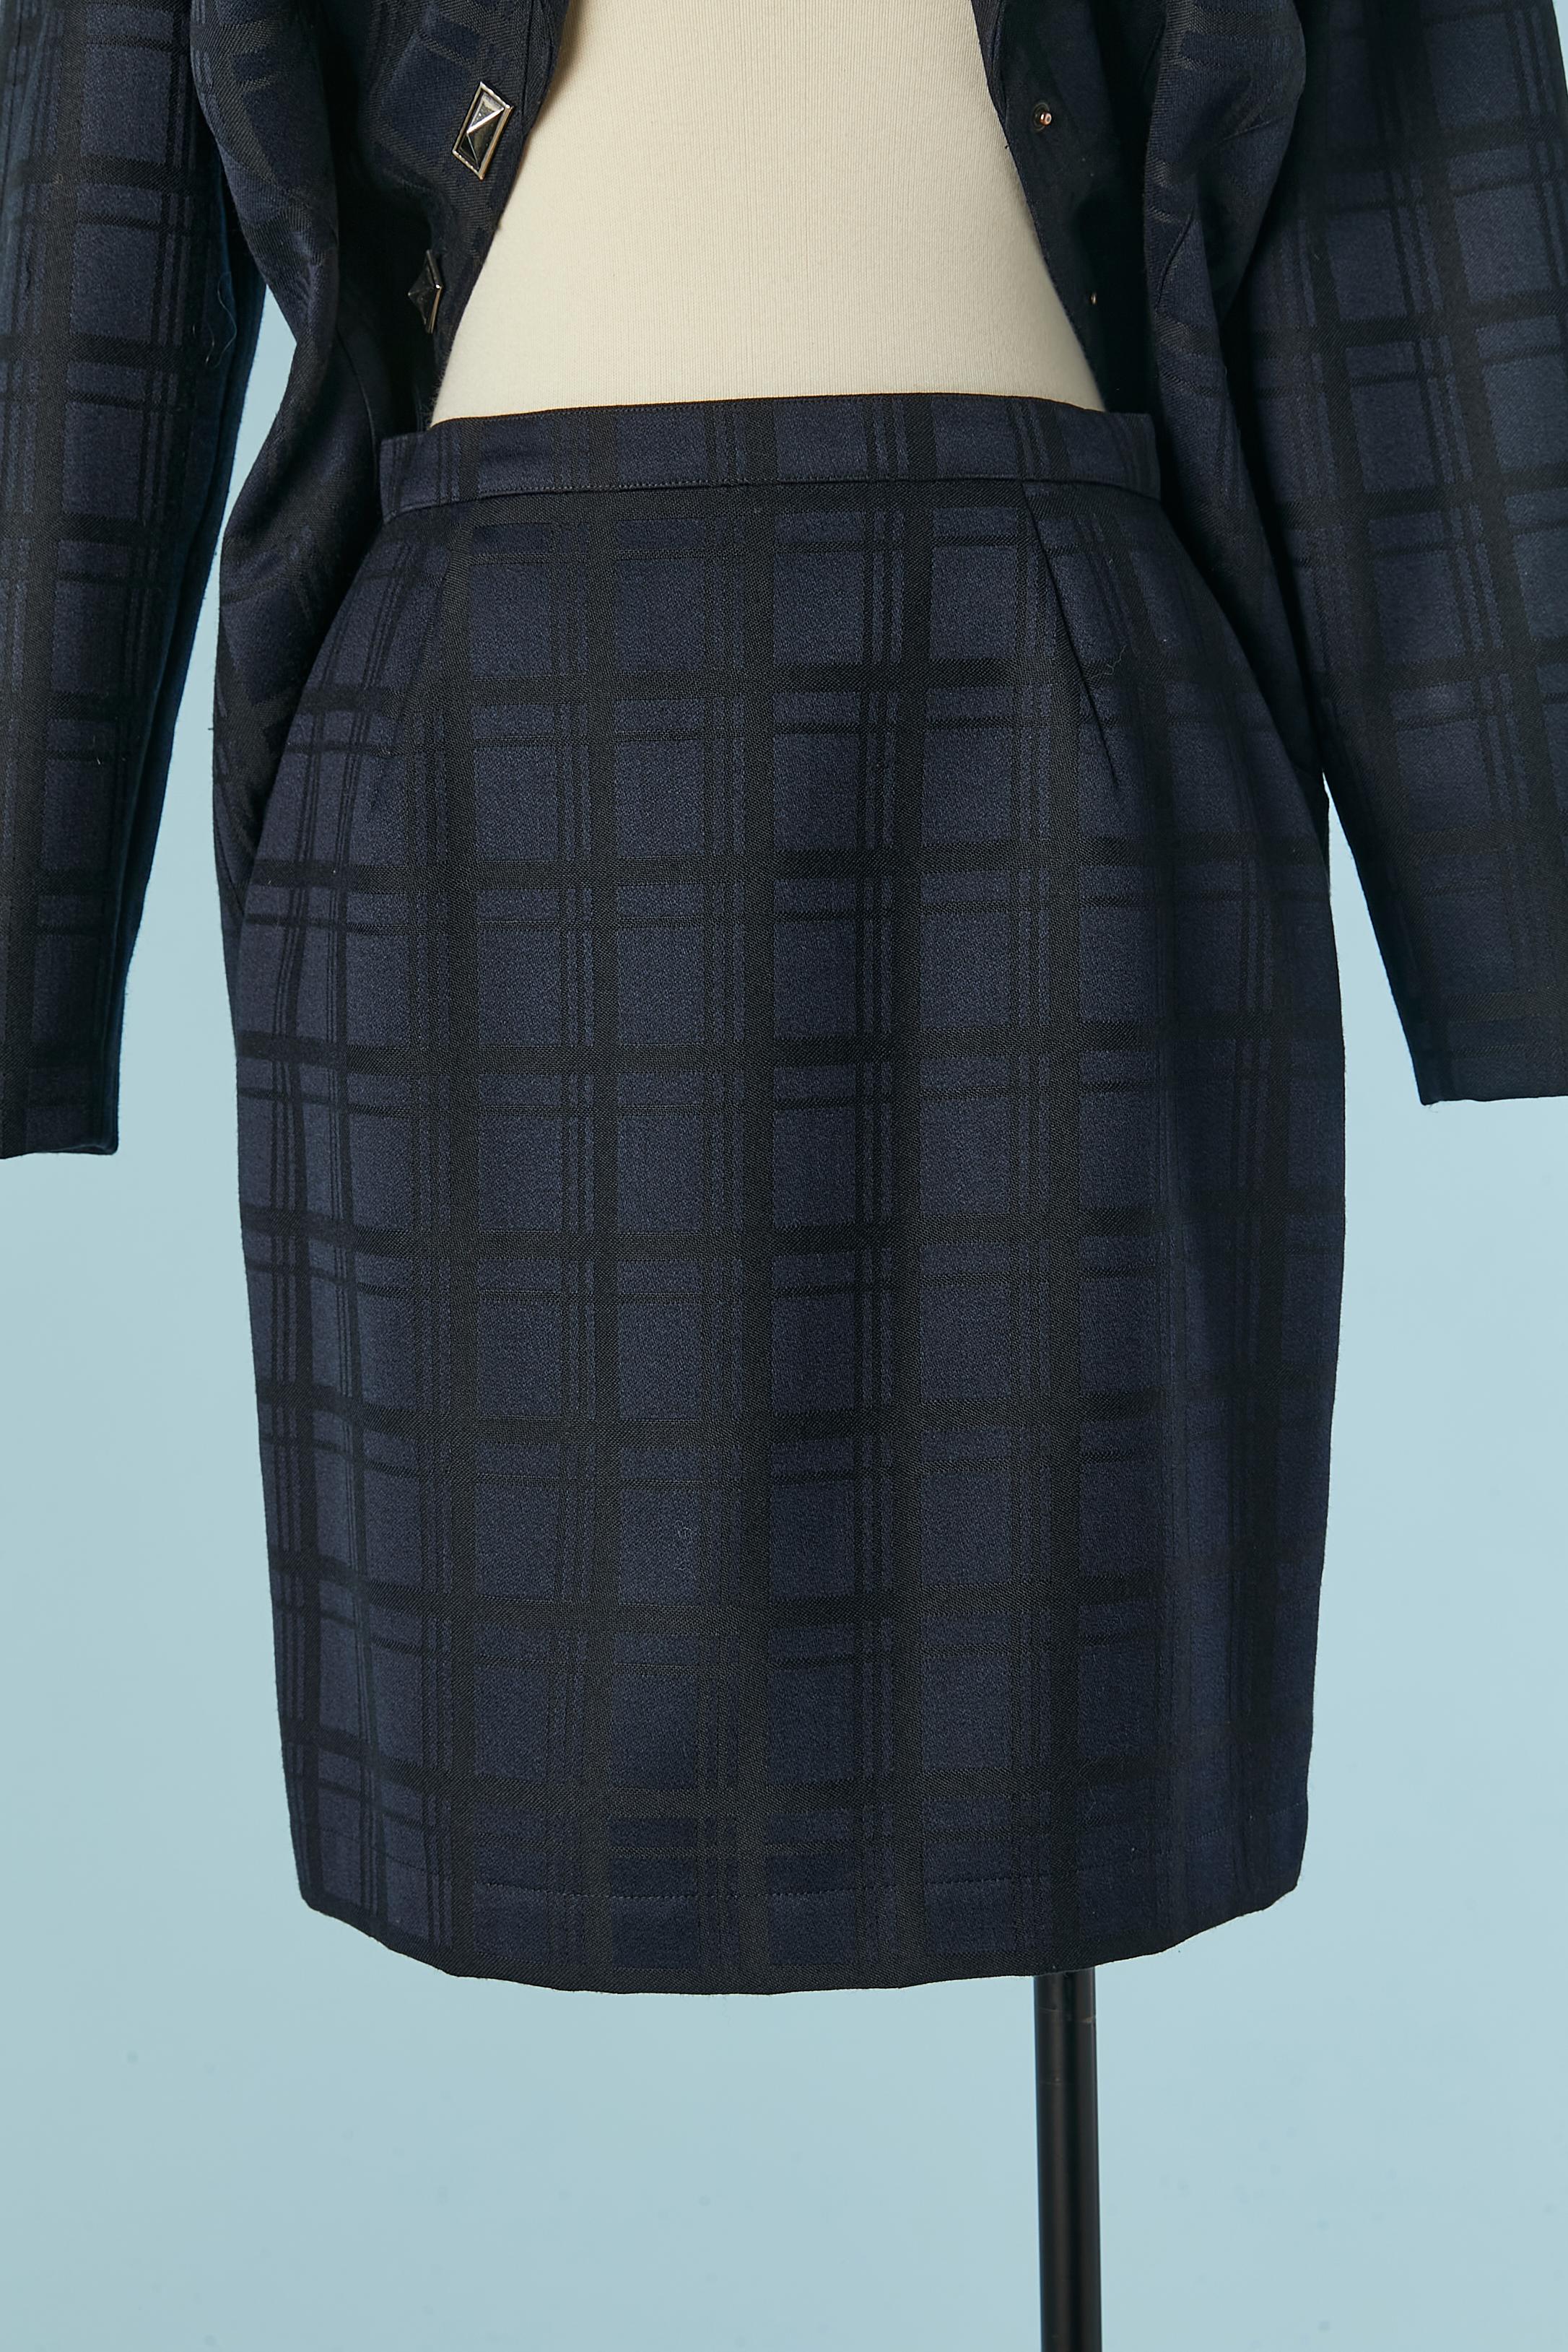 Navy blue and black check pattern jacquard skirt-suit Thierry Mugler Circa 1990 For Sale 3